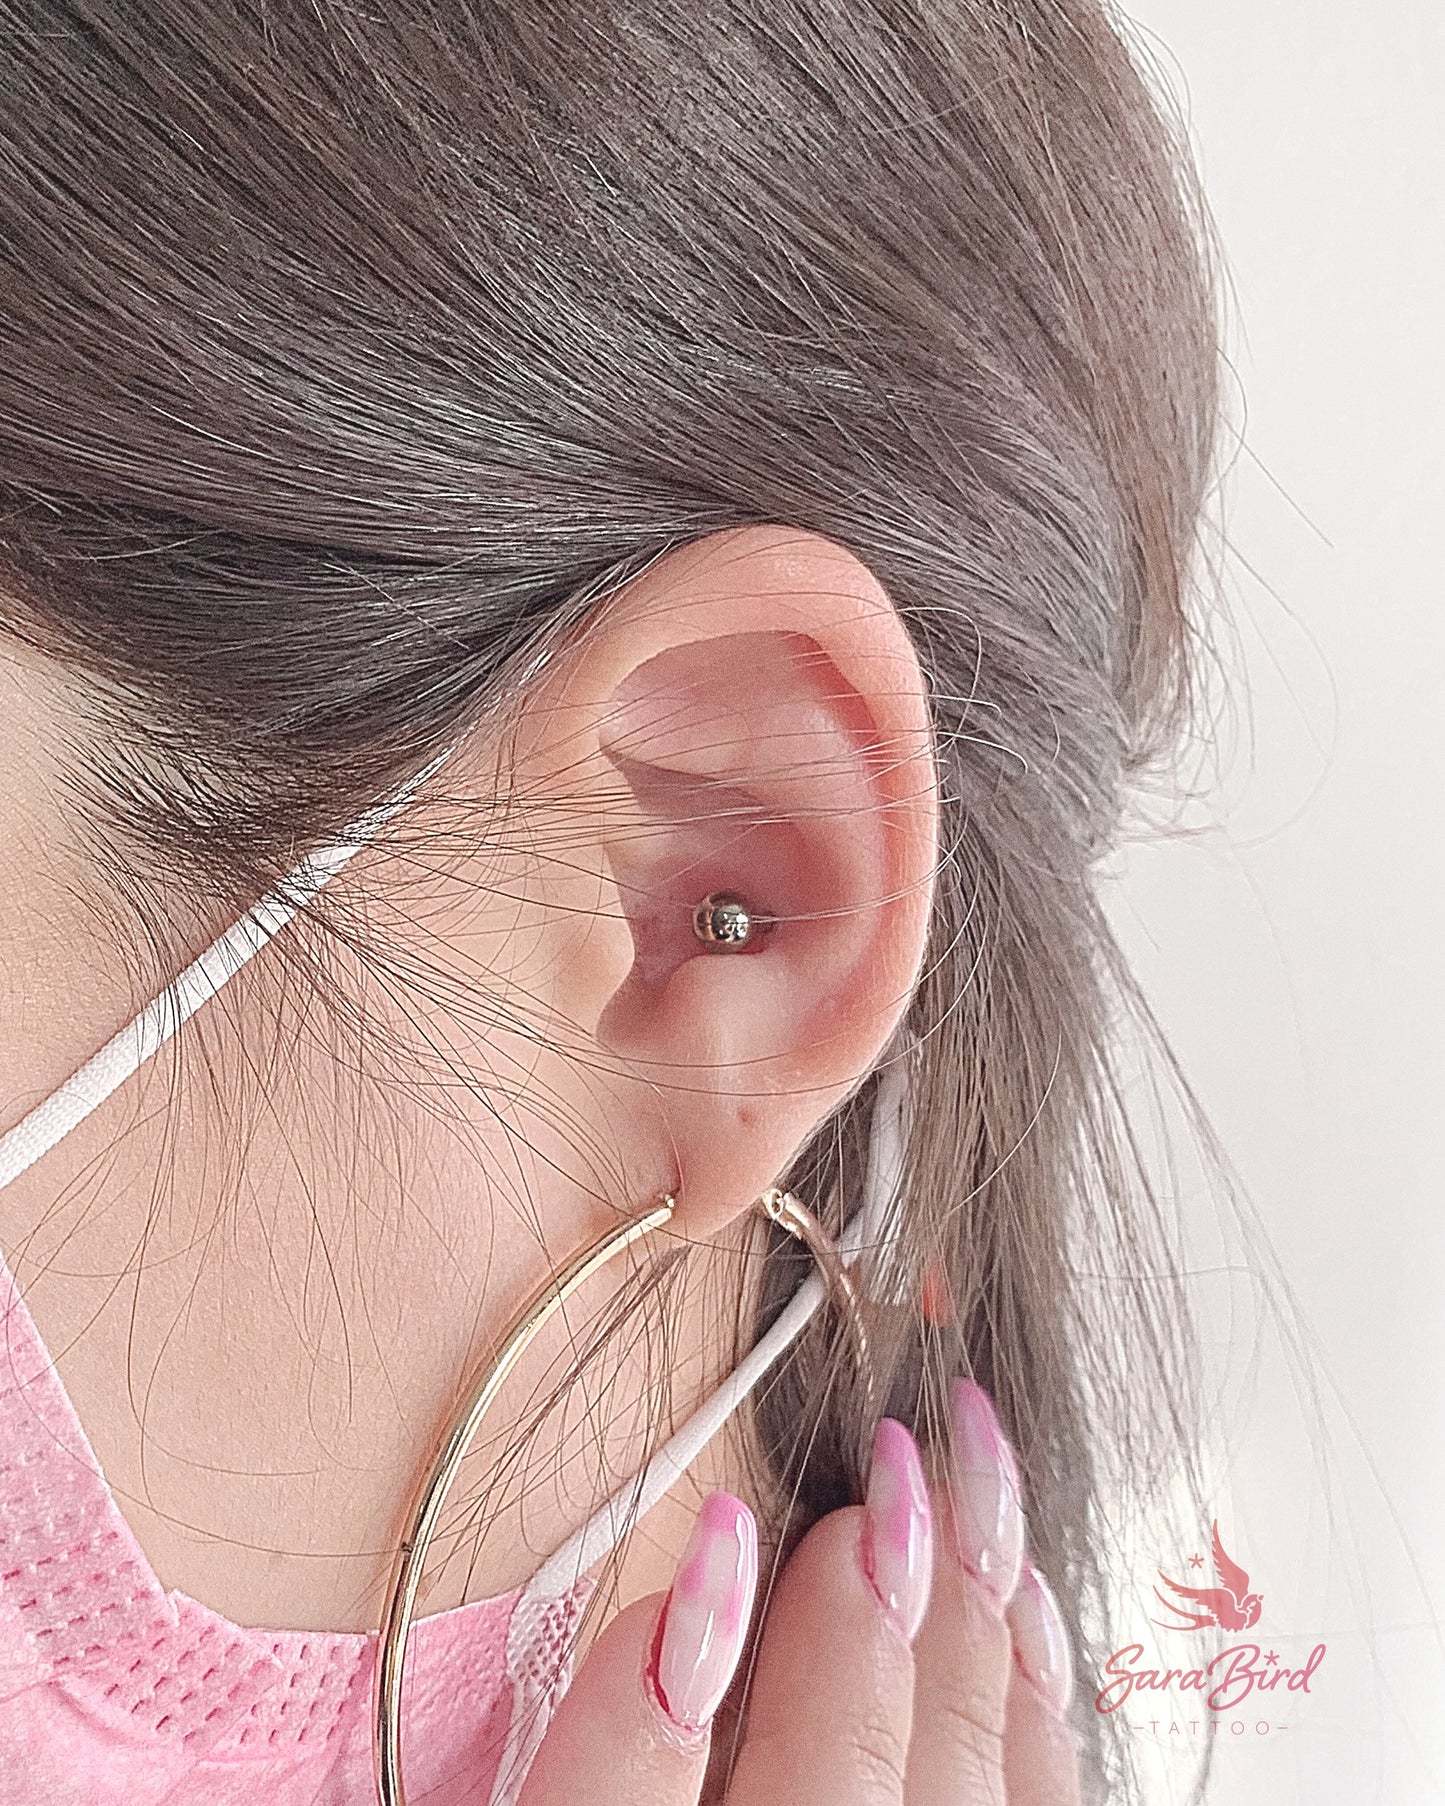 Titanium Jeweled Ear Piecing + Anesthetic + Healing Support